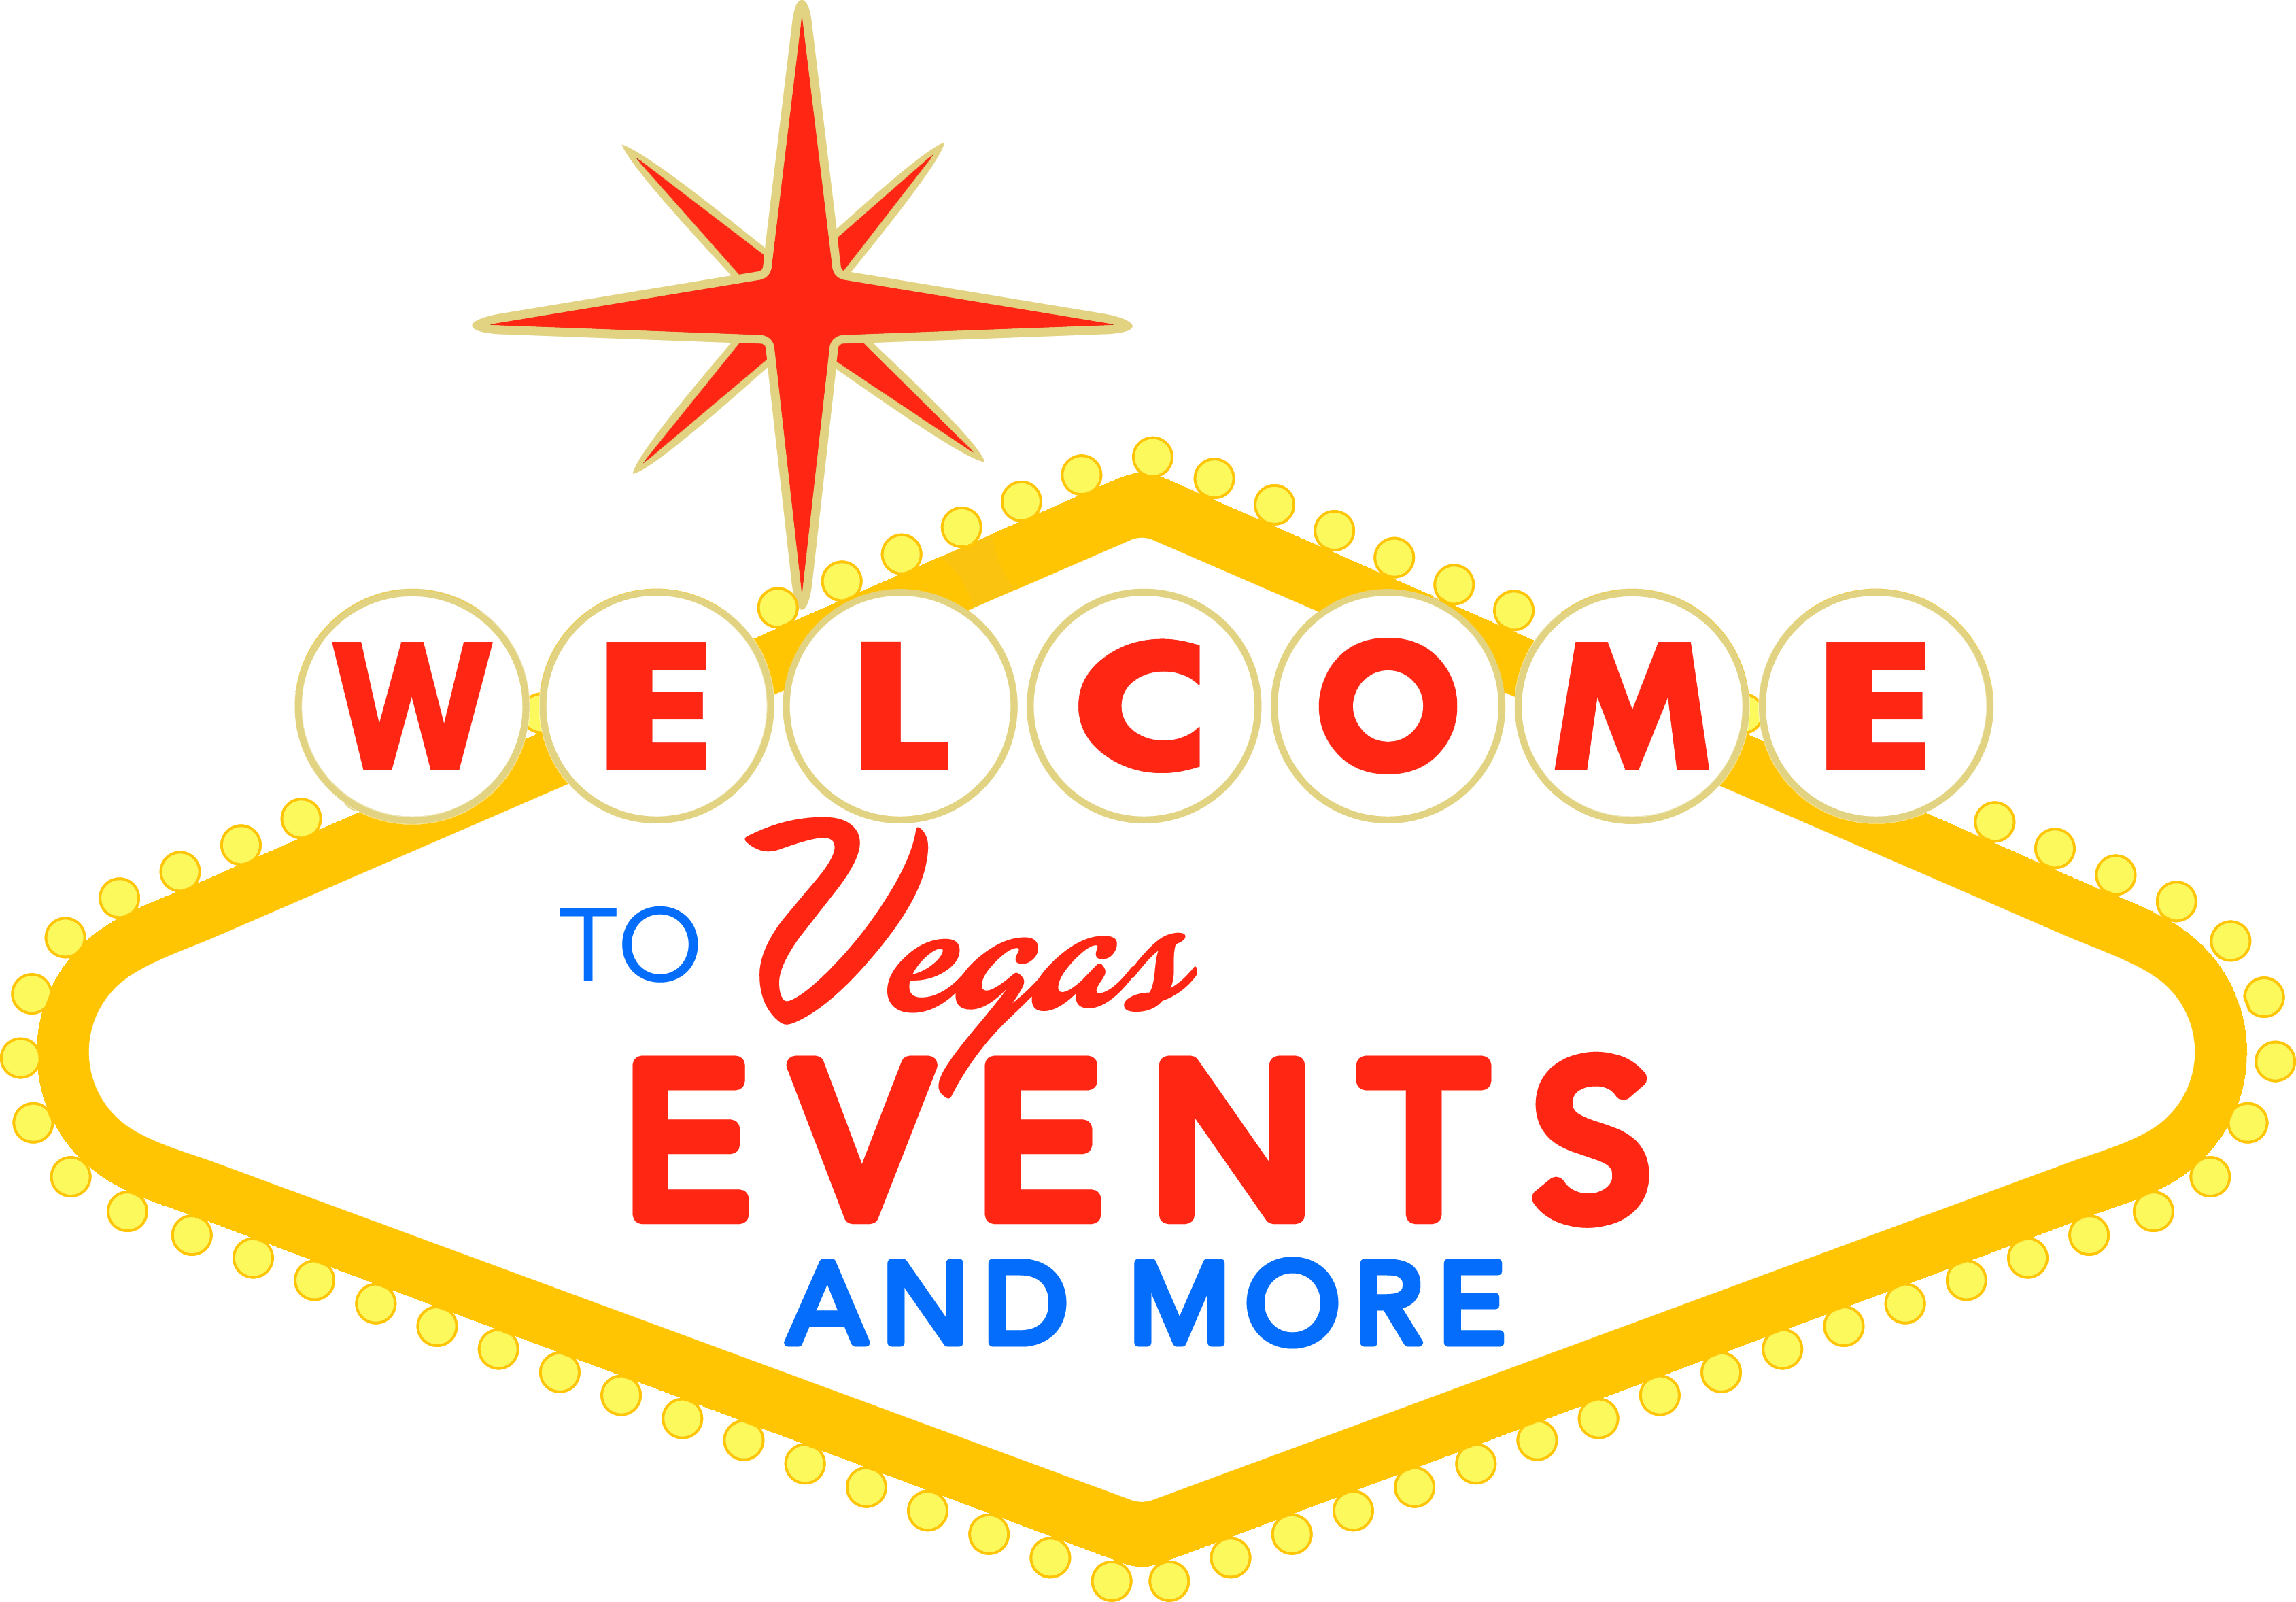 Vegas events and more